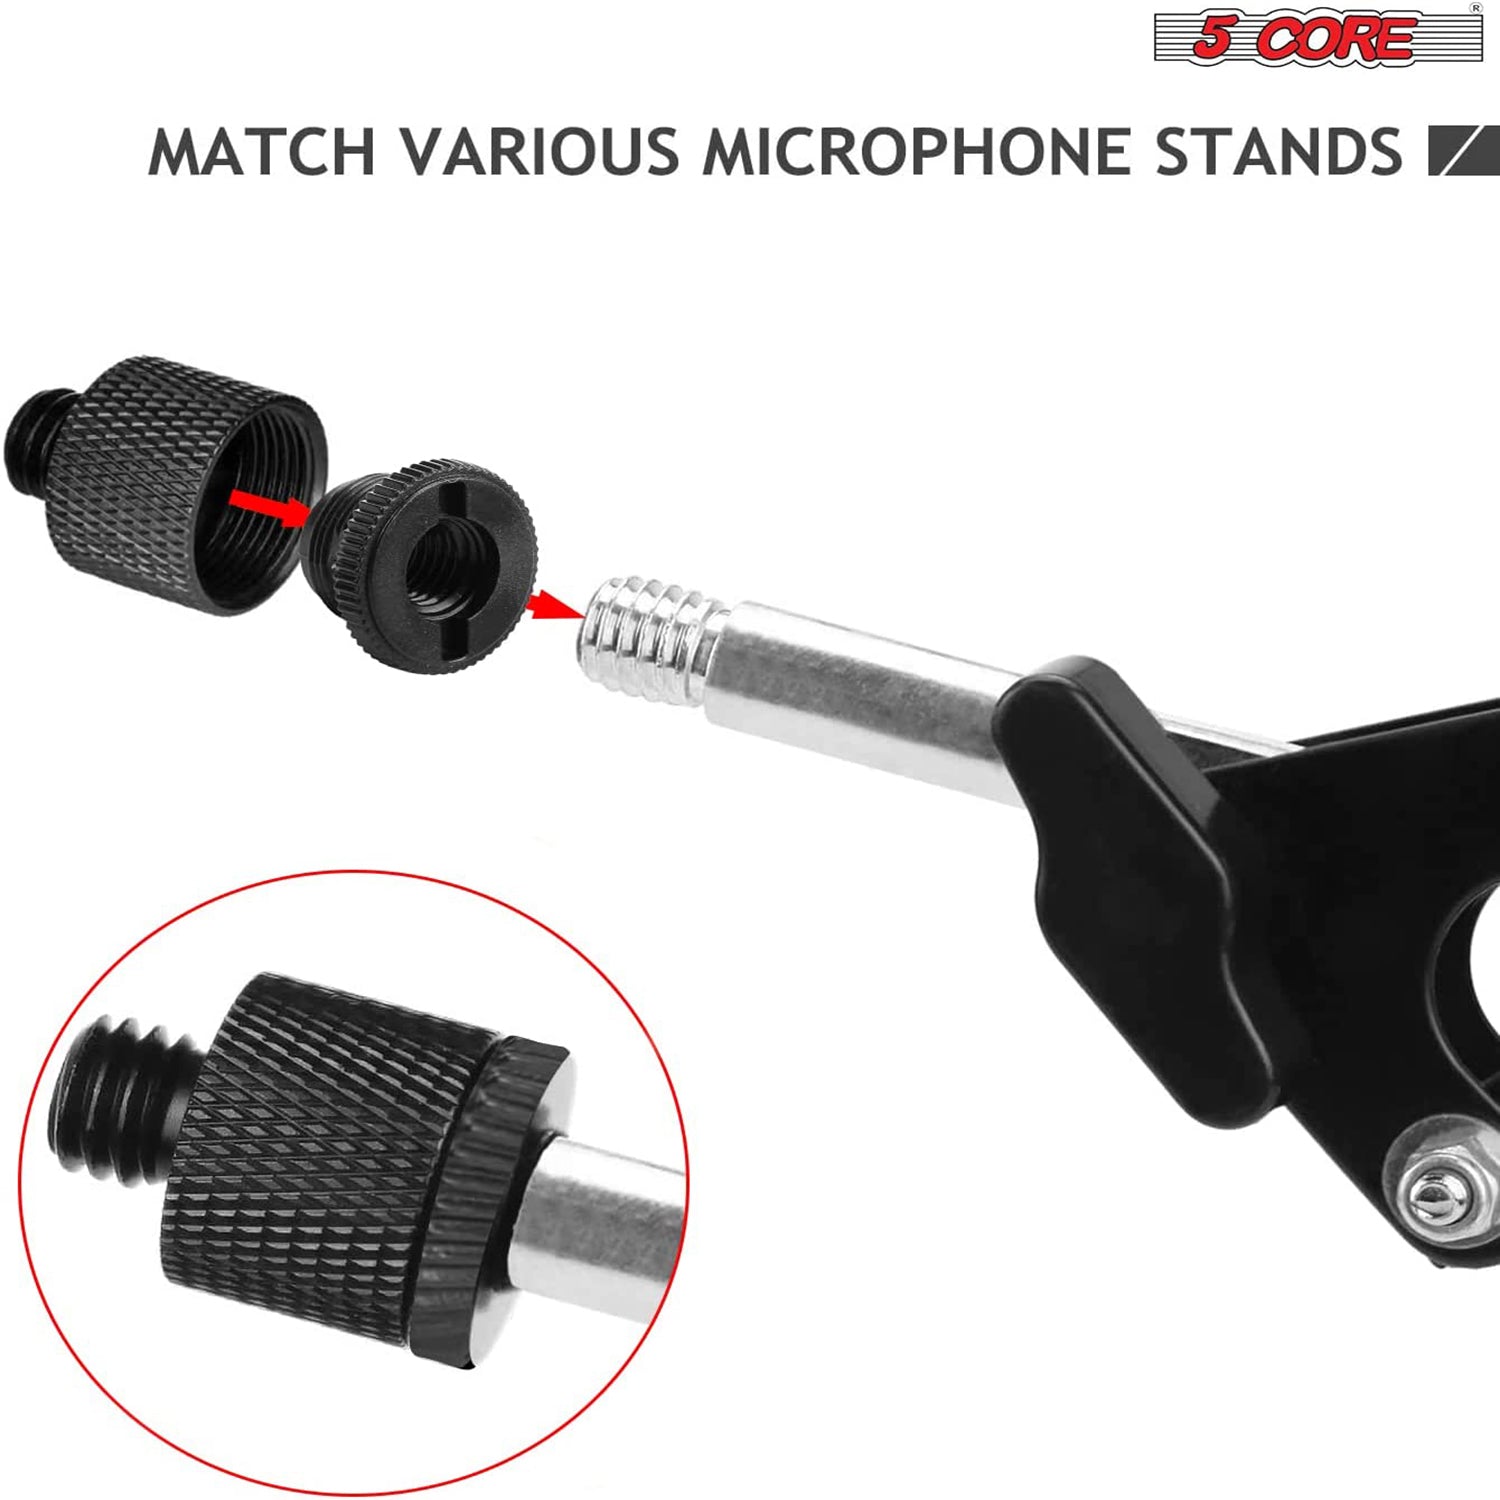 5 Core Mic Stand Adapter 5/8 Male to 3/8 Female Screw Adapter w Knurled Surface Adopter 2/4/12 Pc